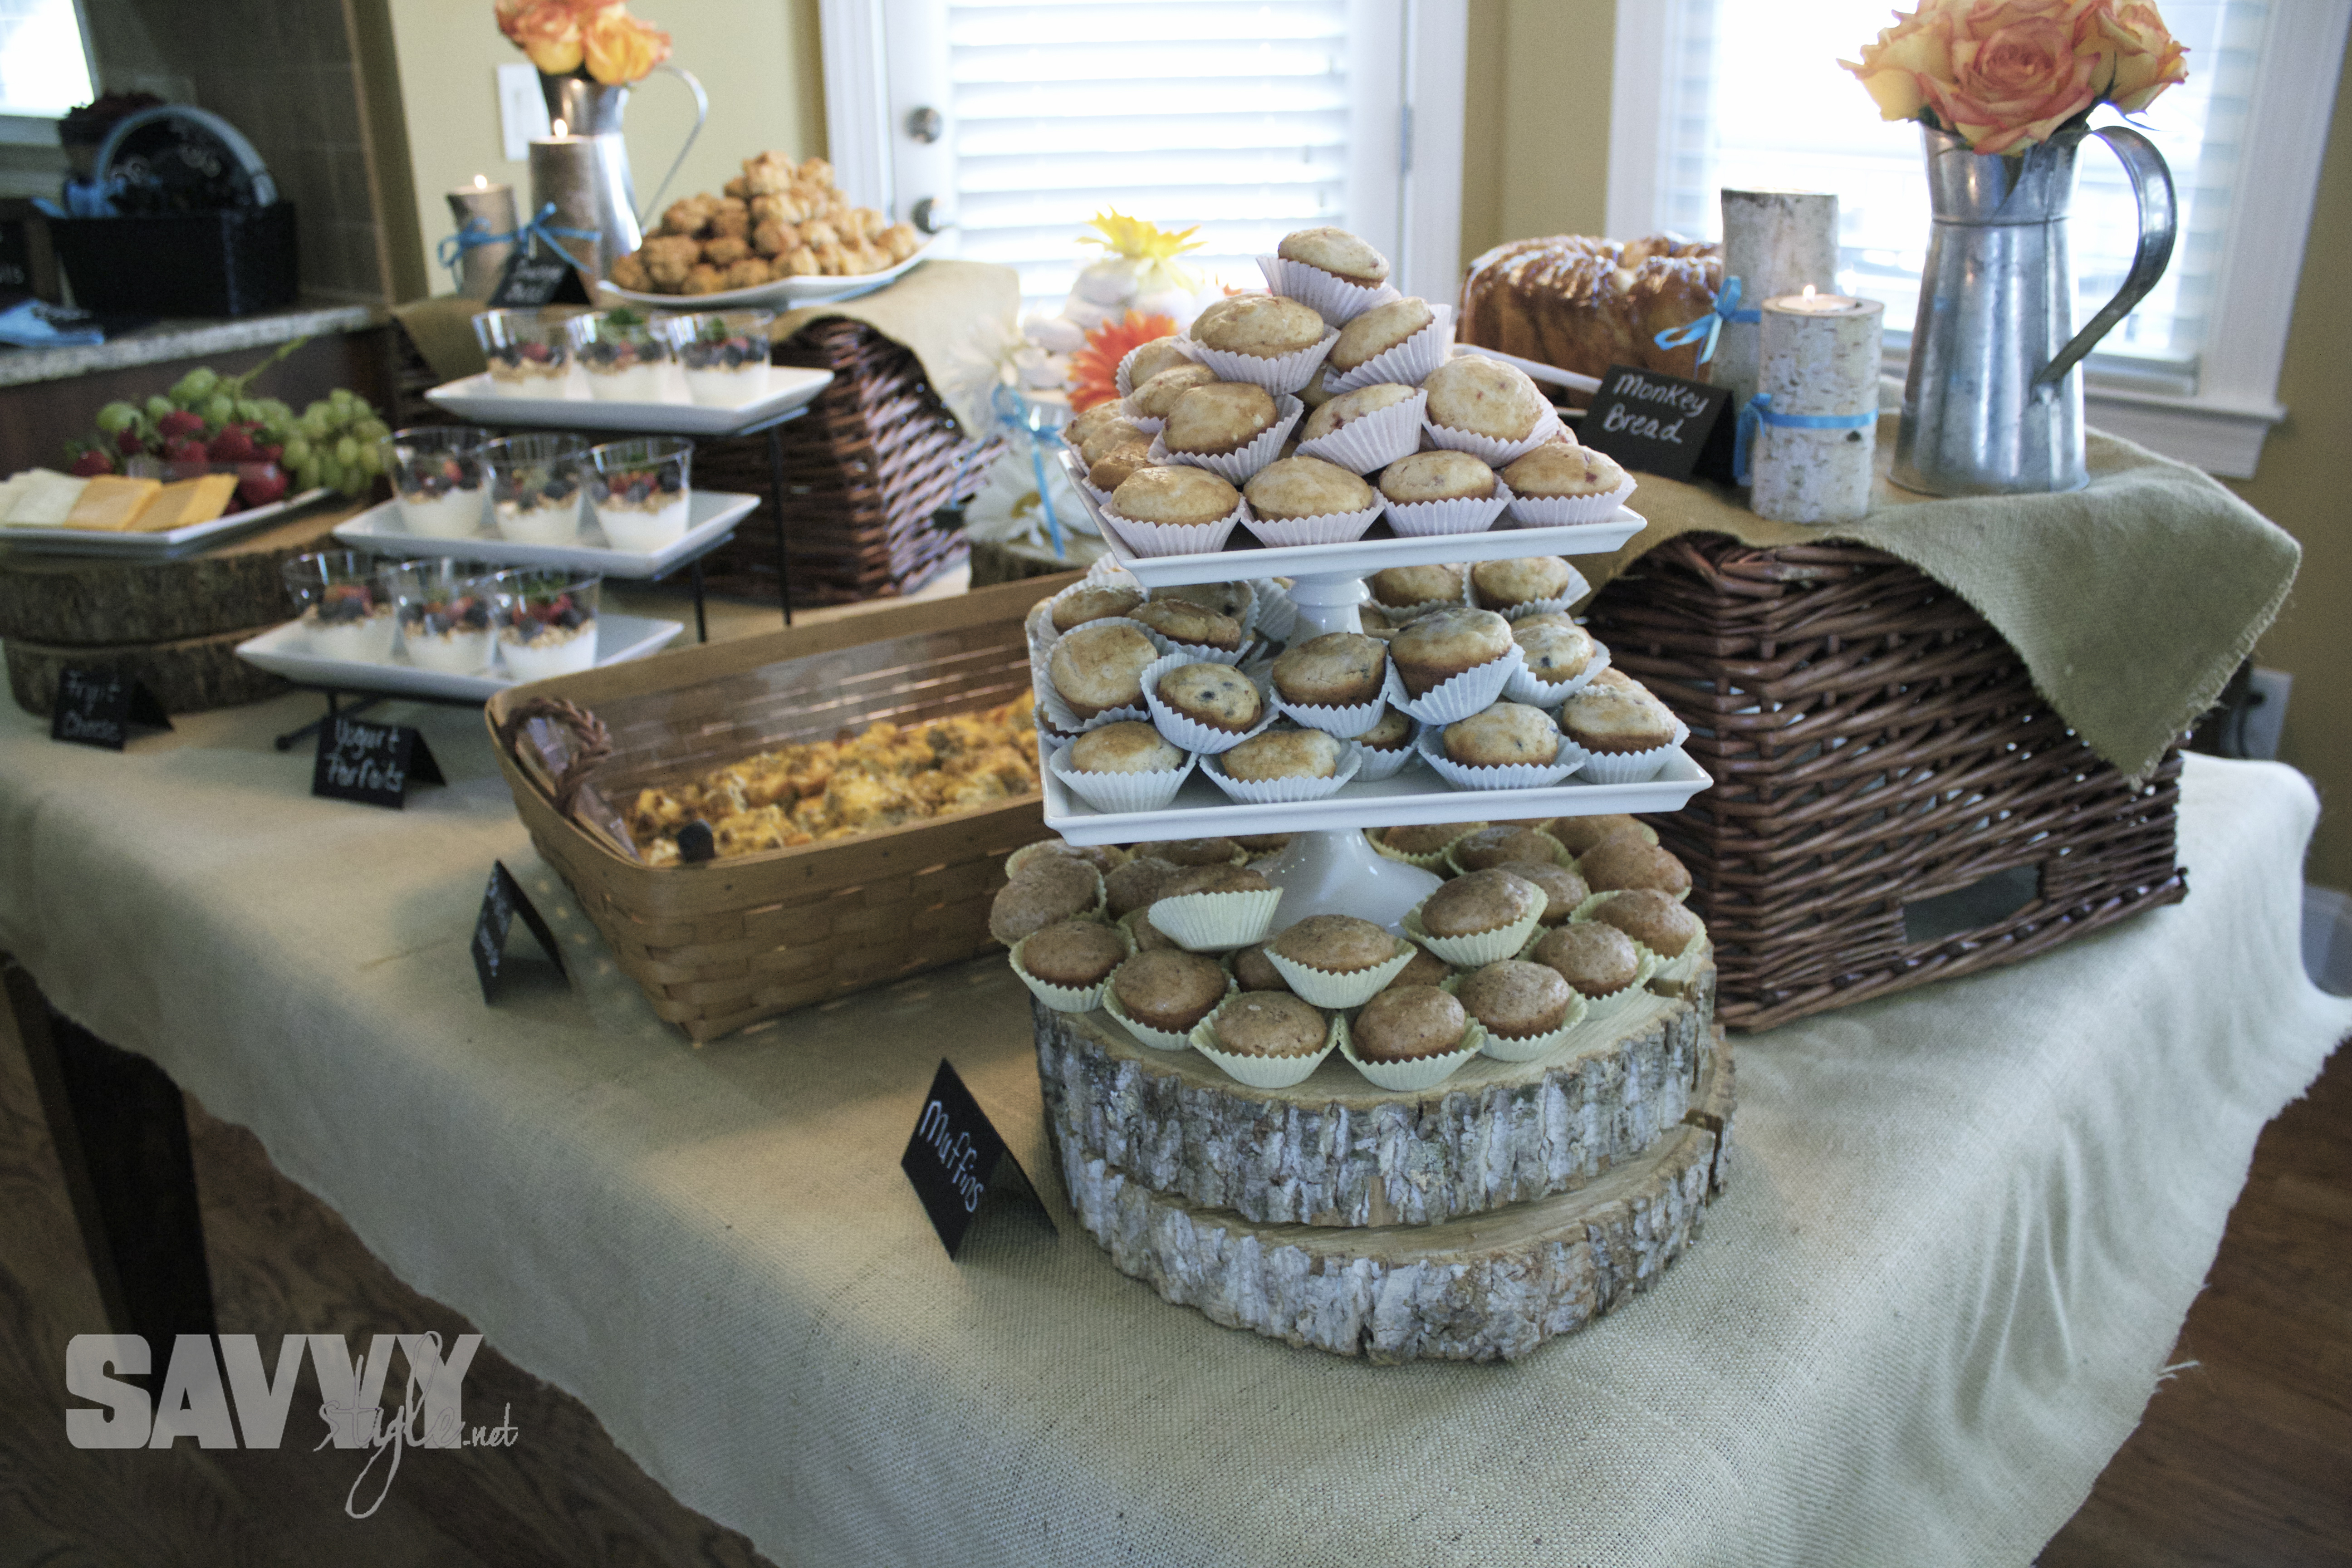 The spread of brunch goodies made by all the lovely hostesses!